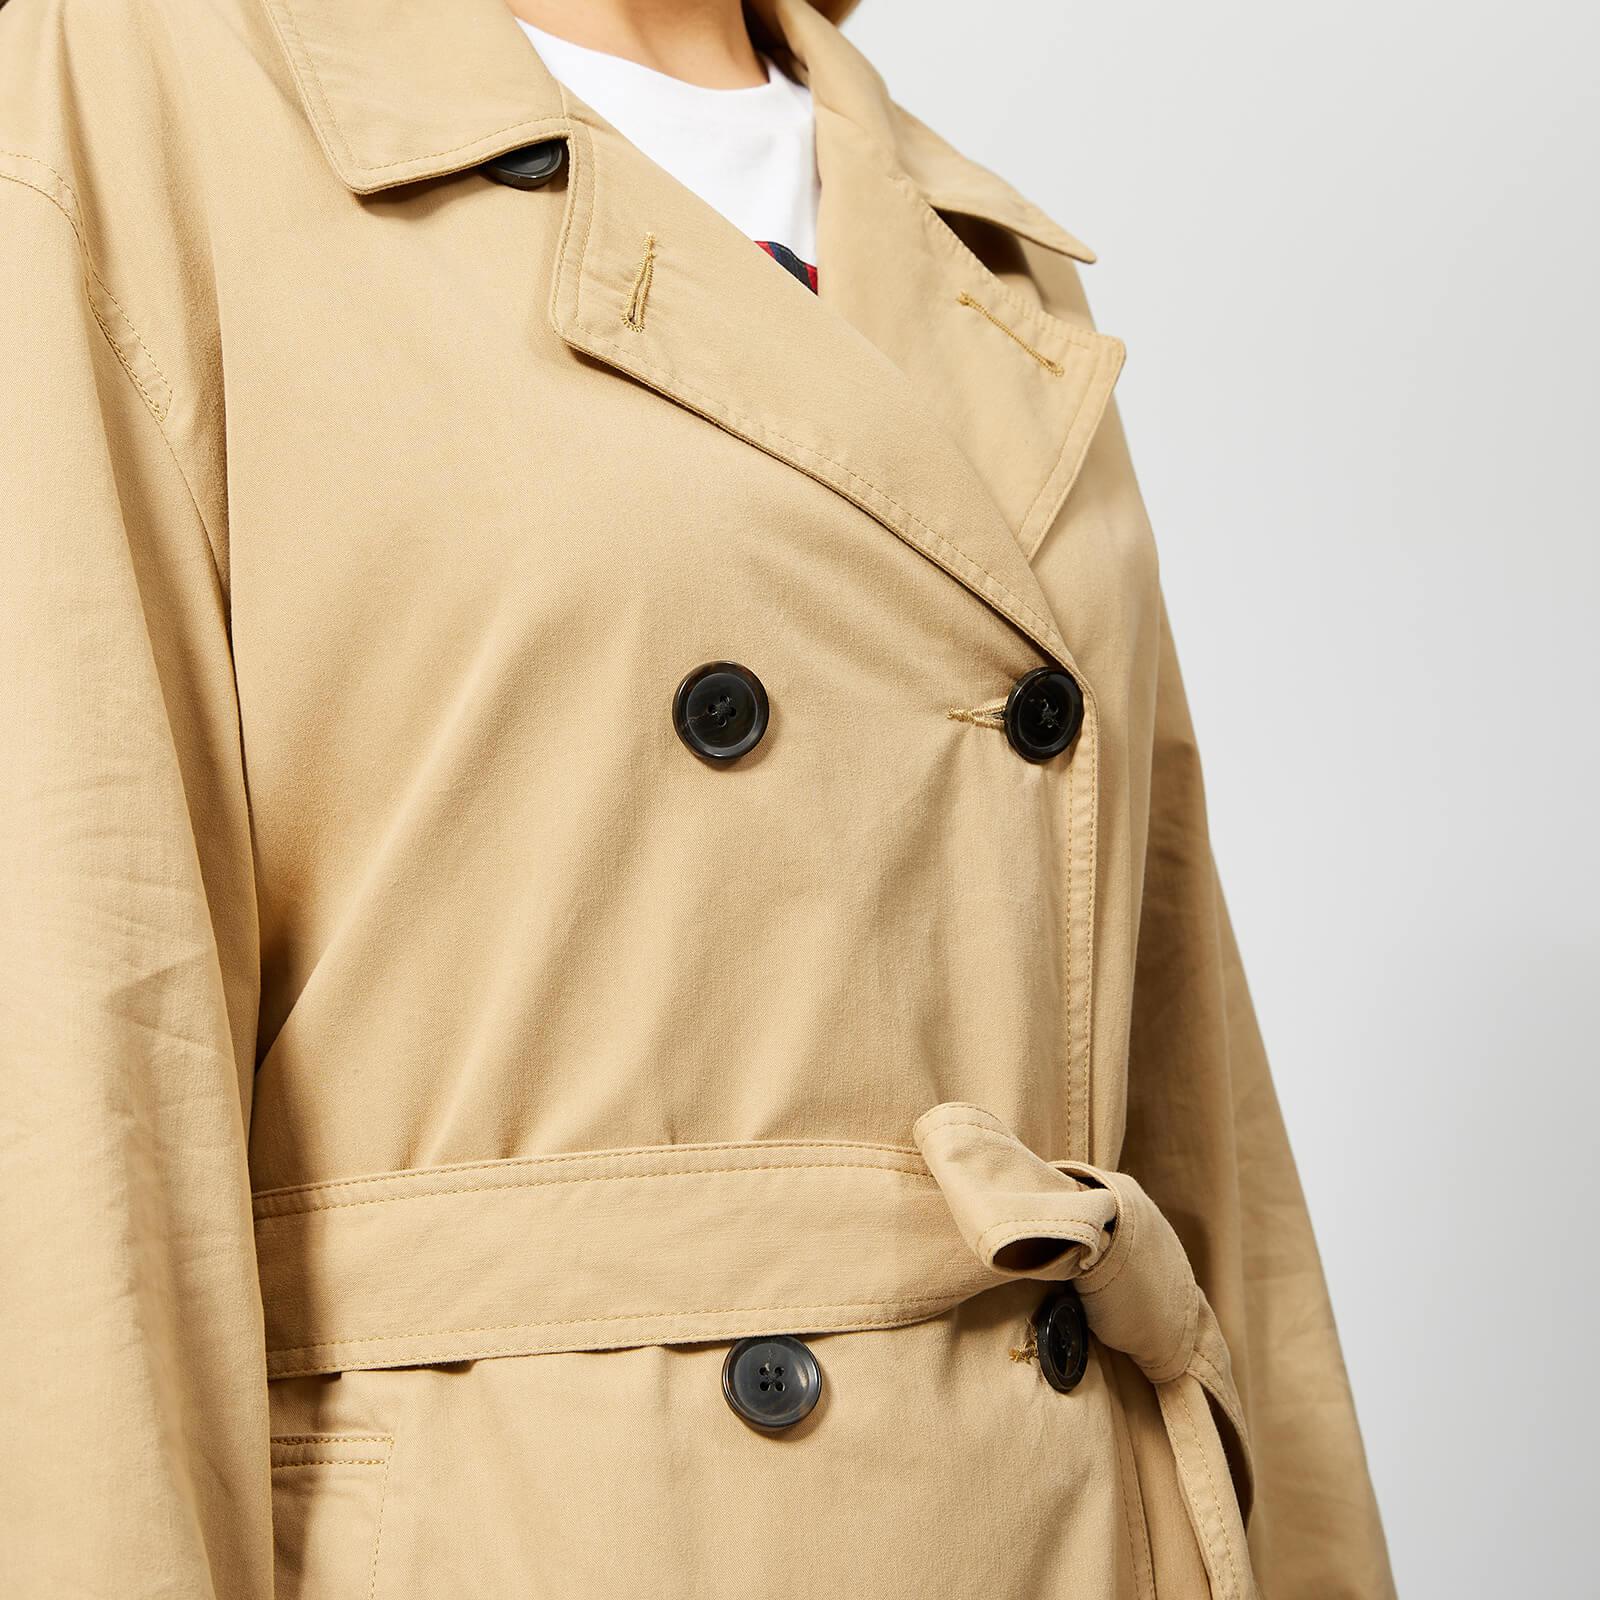 kate trench coat levis